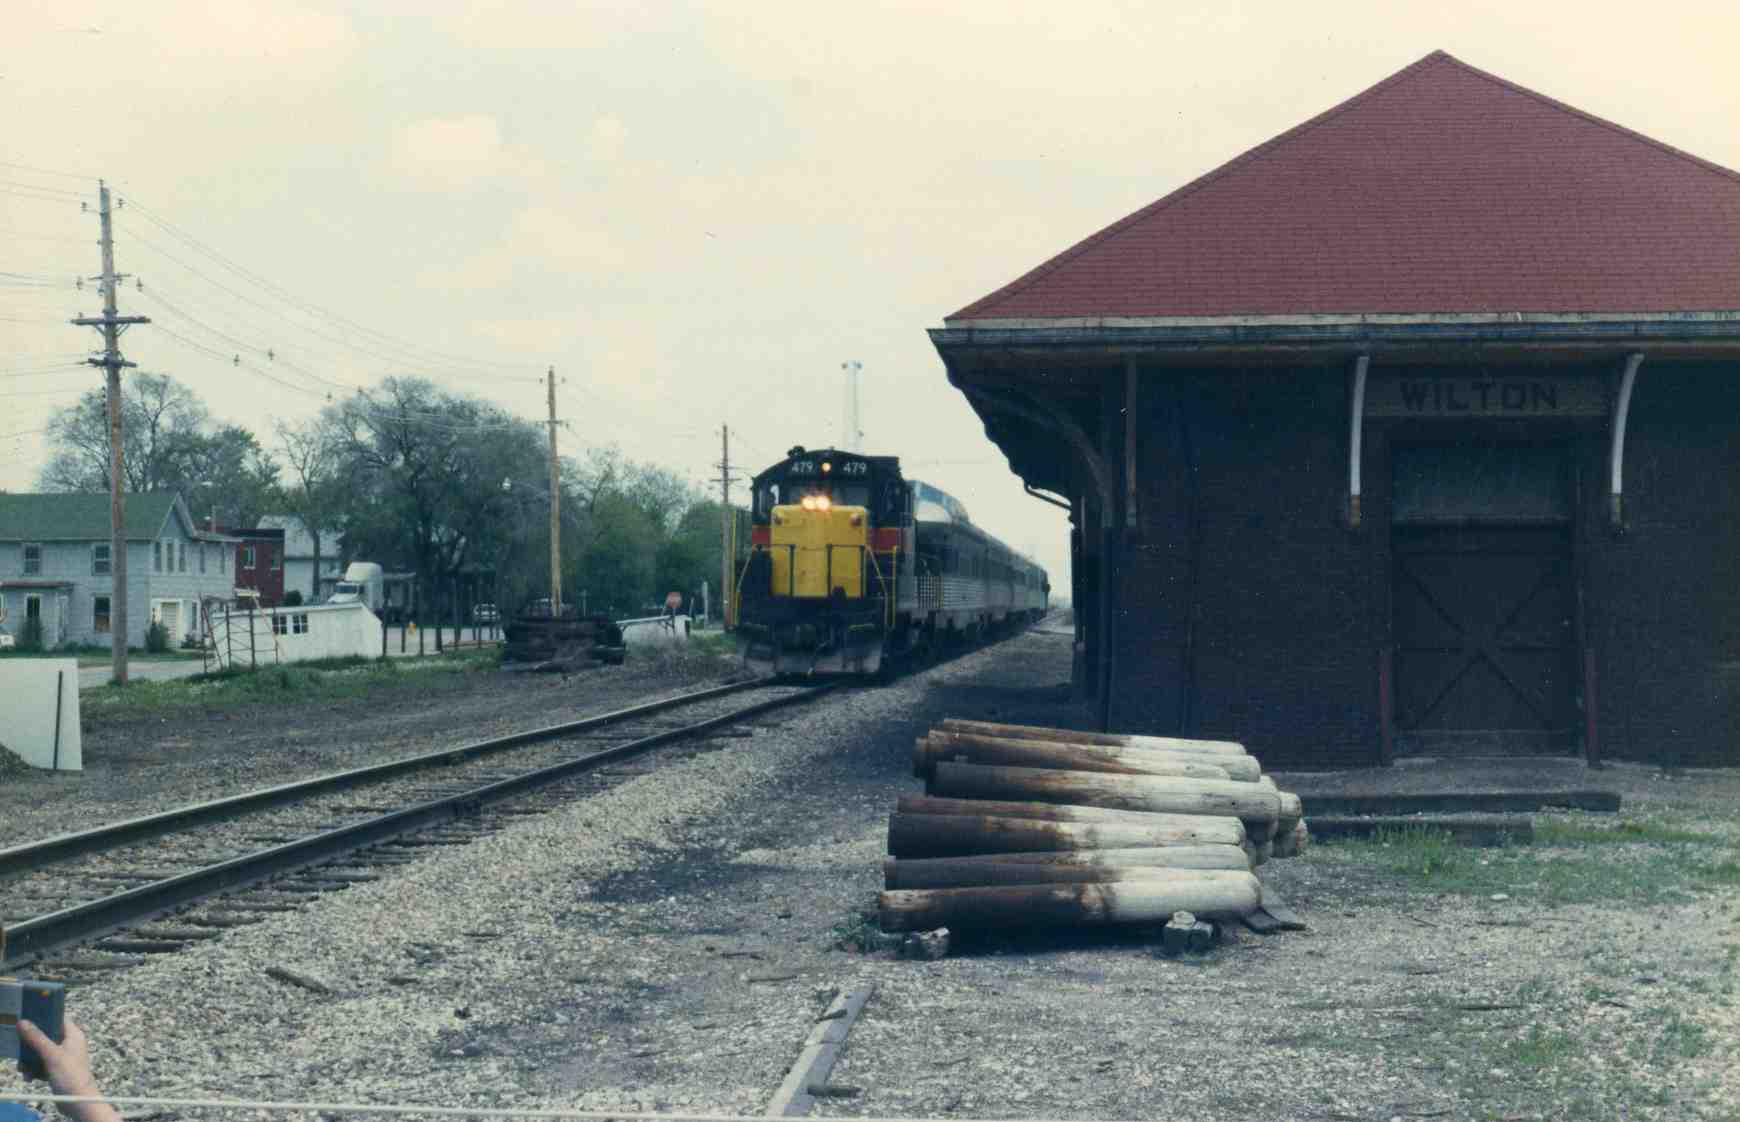 479 and the Quad City Rocket approach the Wilton depot